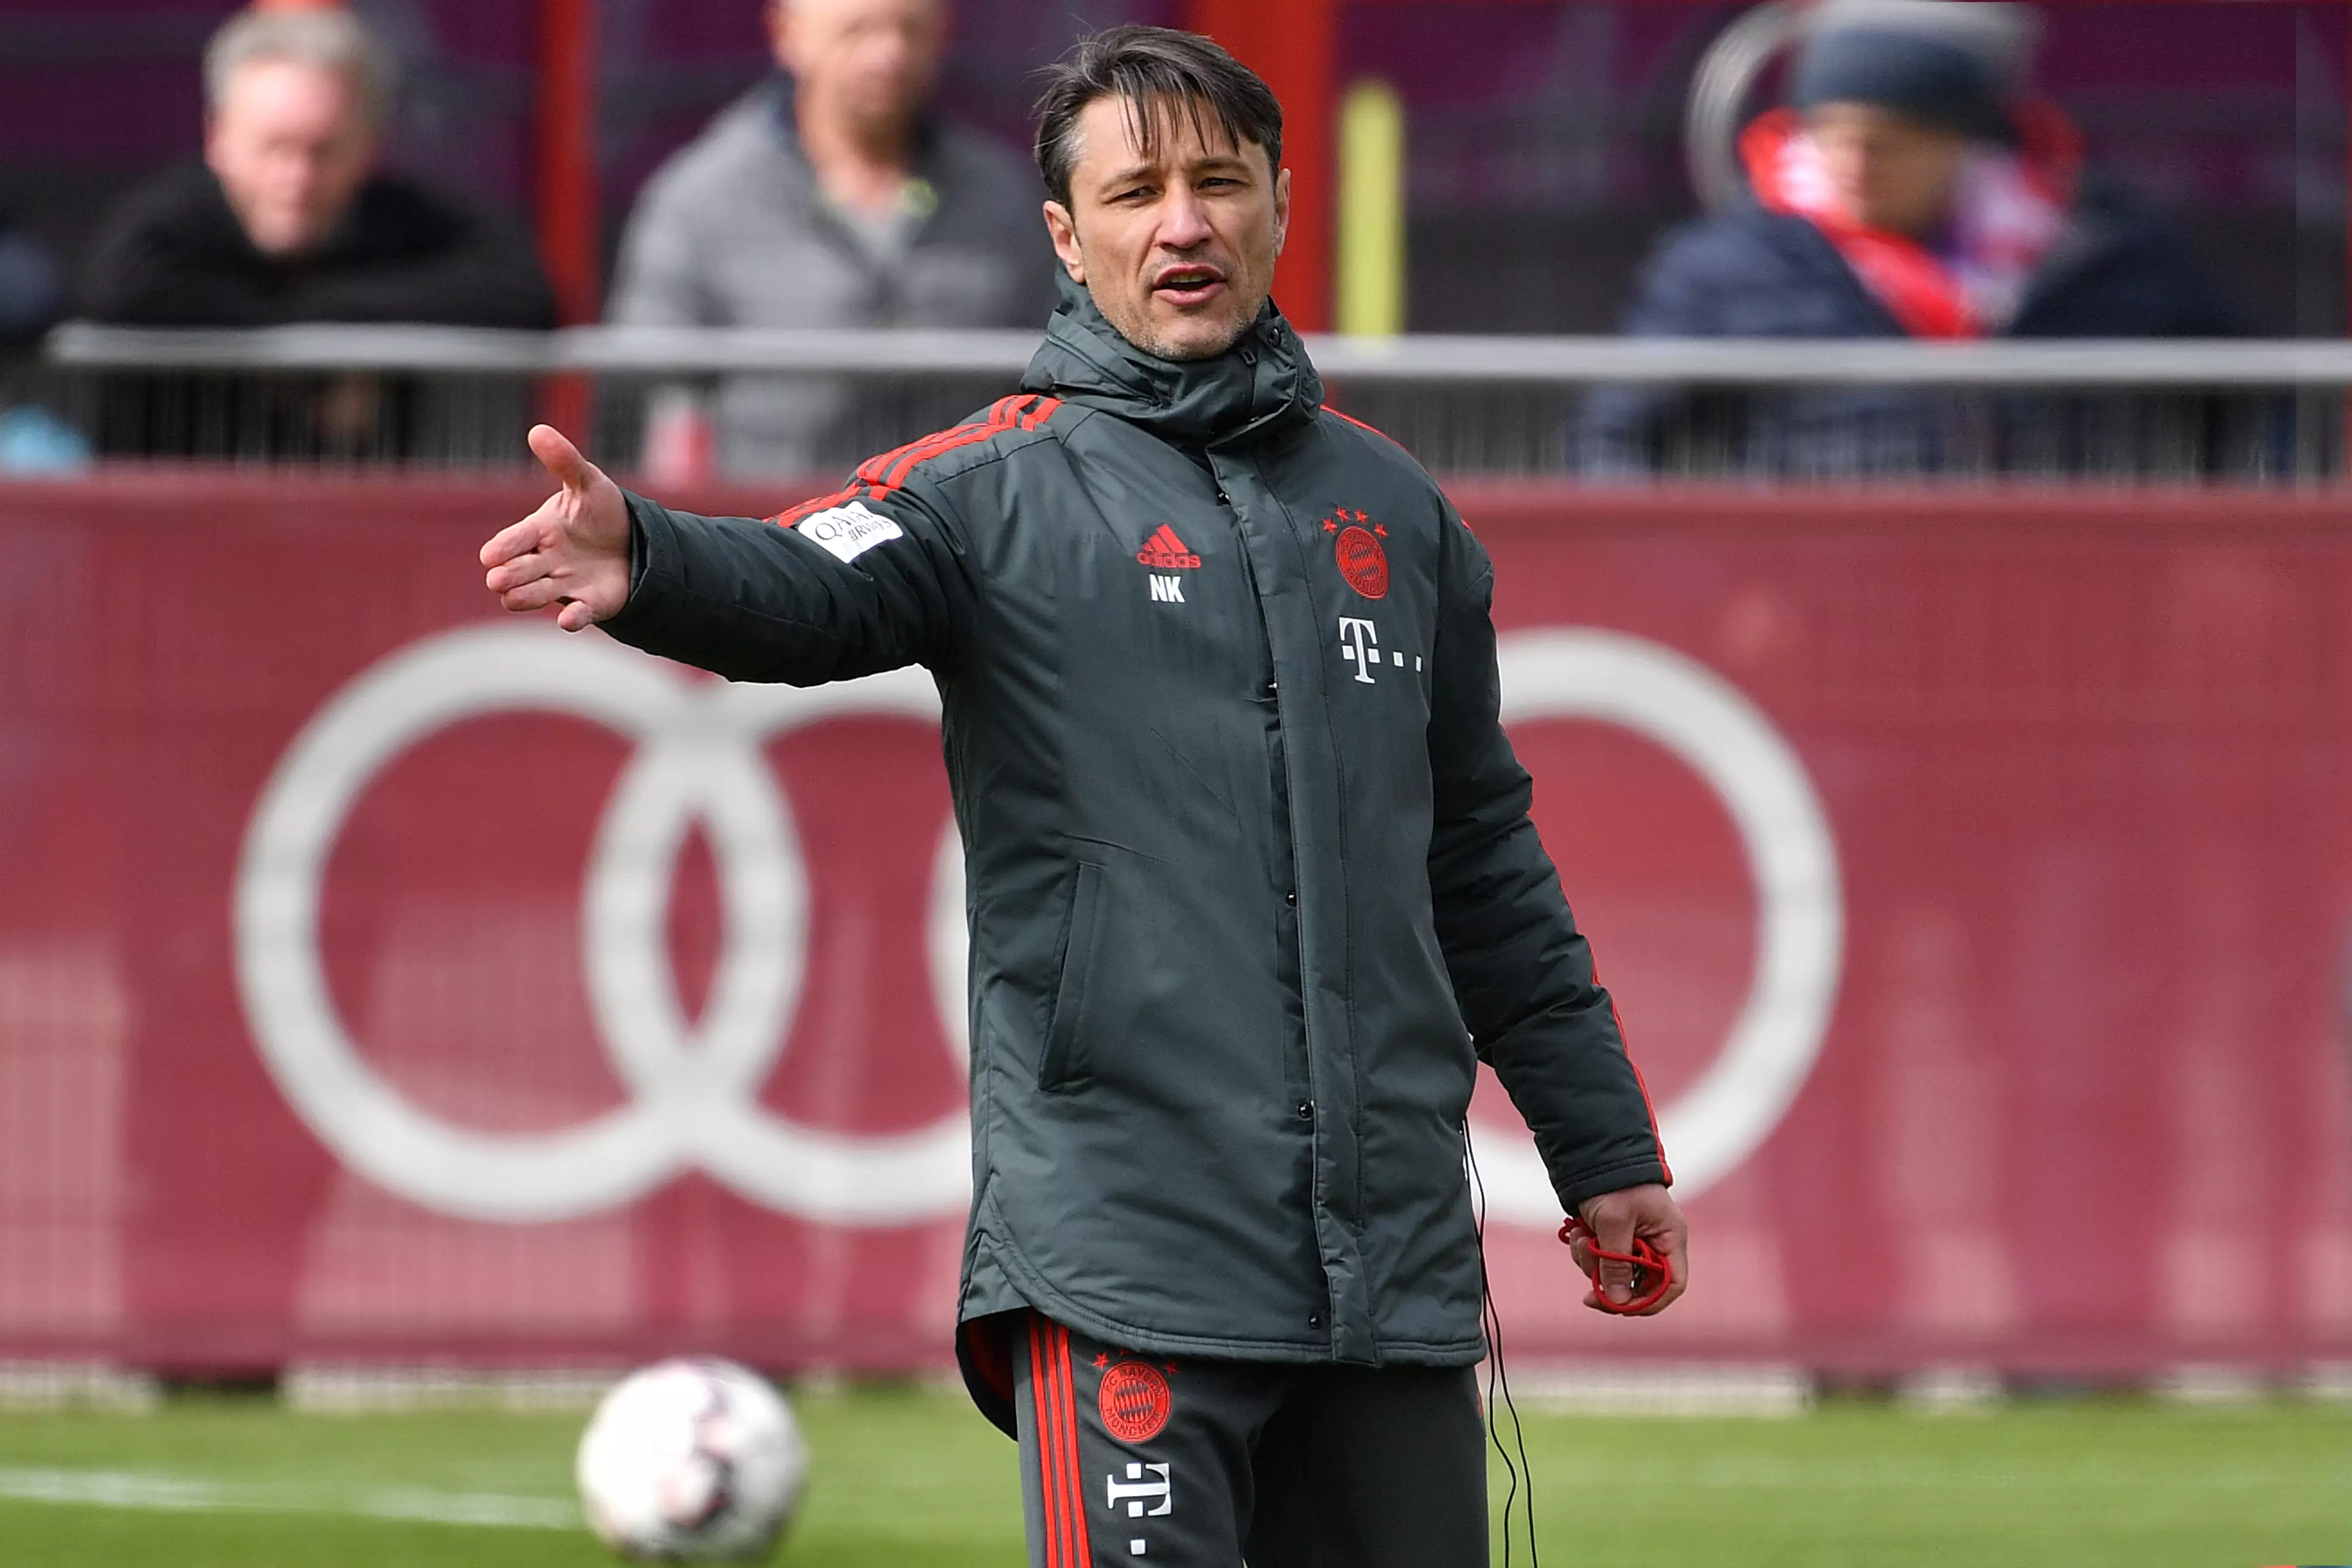 Should Kovac be worried? Image: PA Images